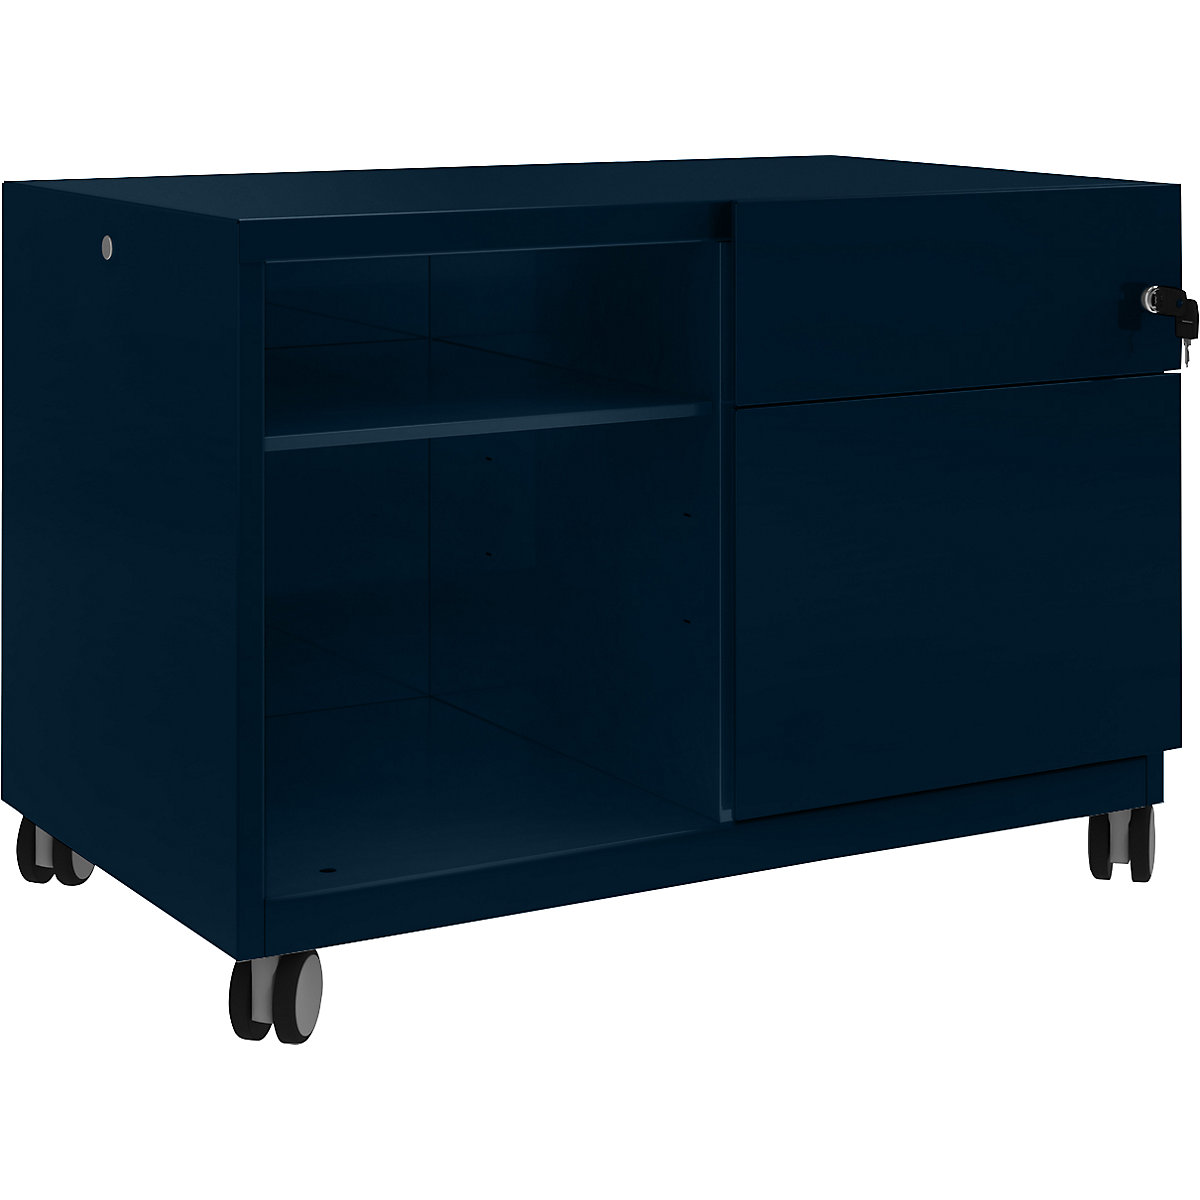 Note™ CADDY, HxBxT 563 x 800 x 490 mm – BISLEY, 1 universal drawer and suspension file drawer on the right, prussian-19